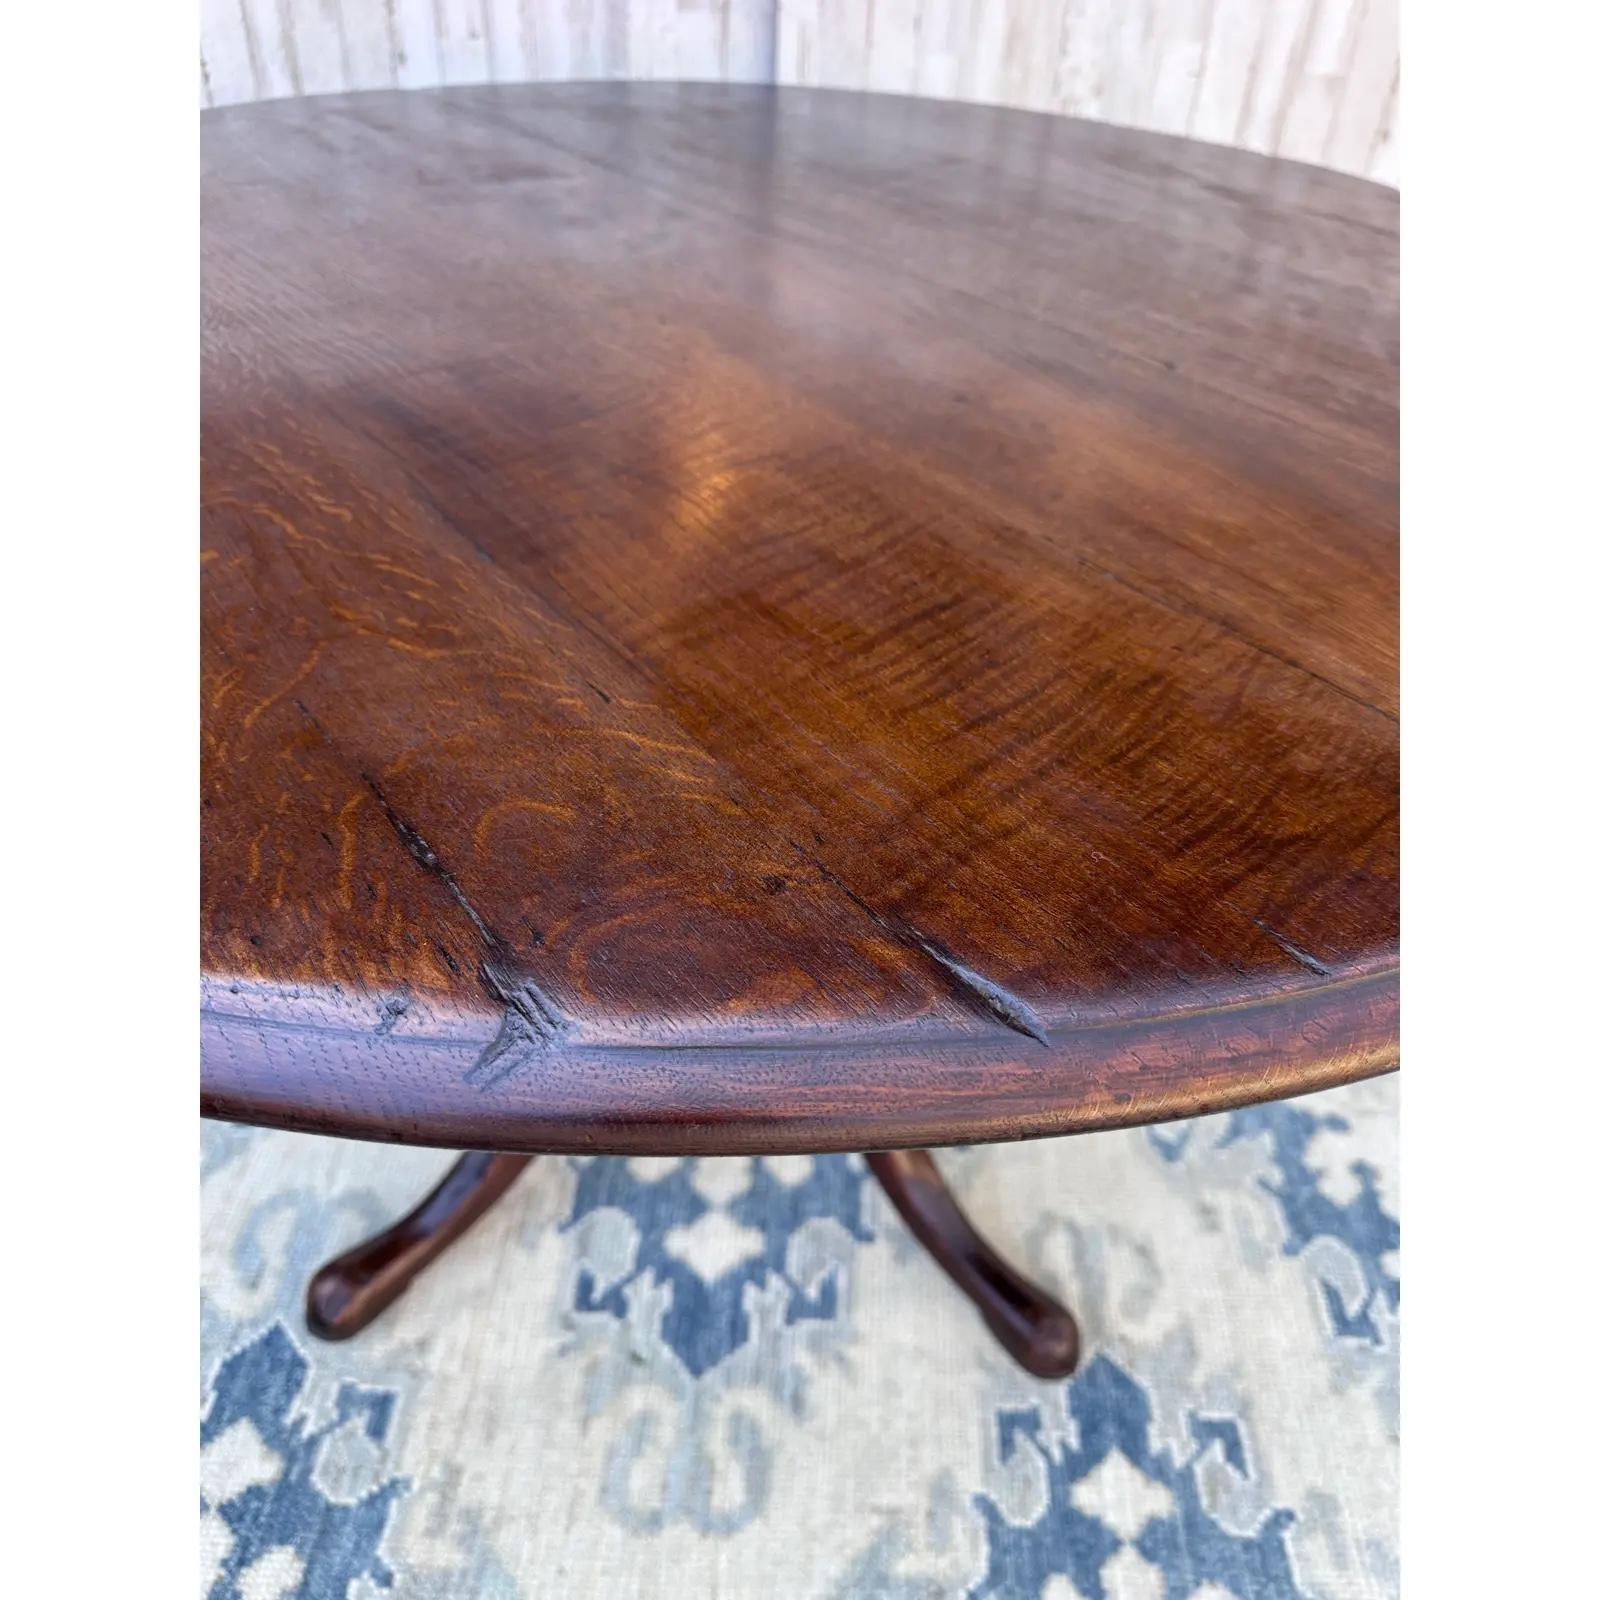 Round English Breakfast Table In Good Condition For Sale In Nashville, TN